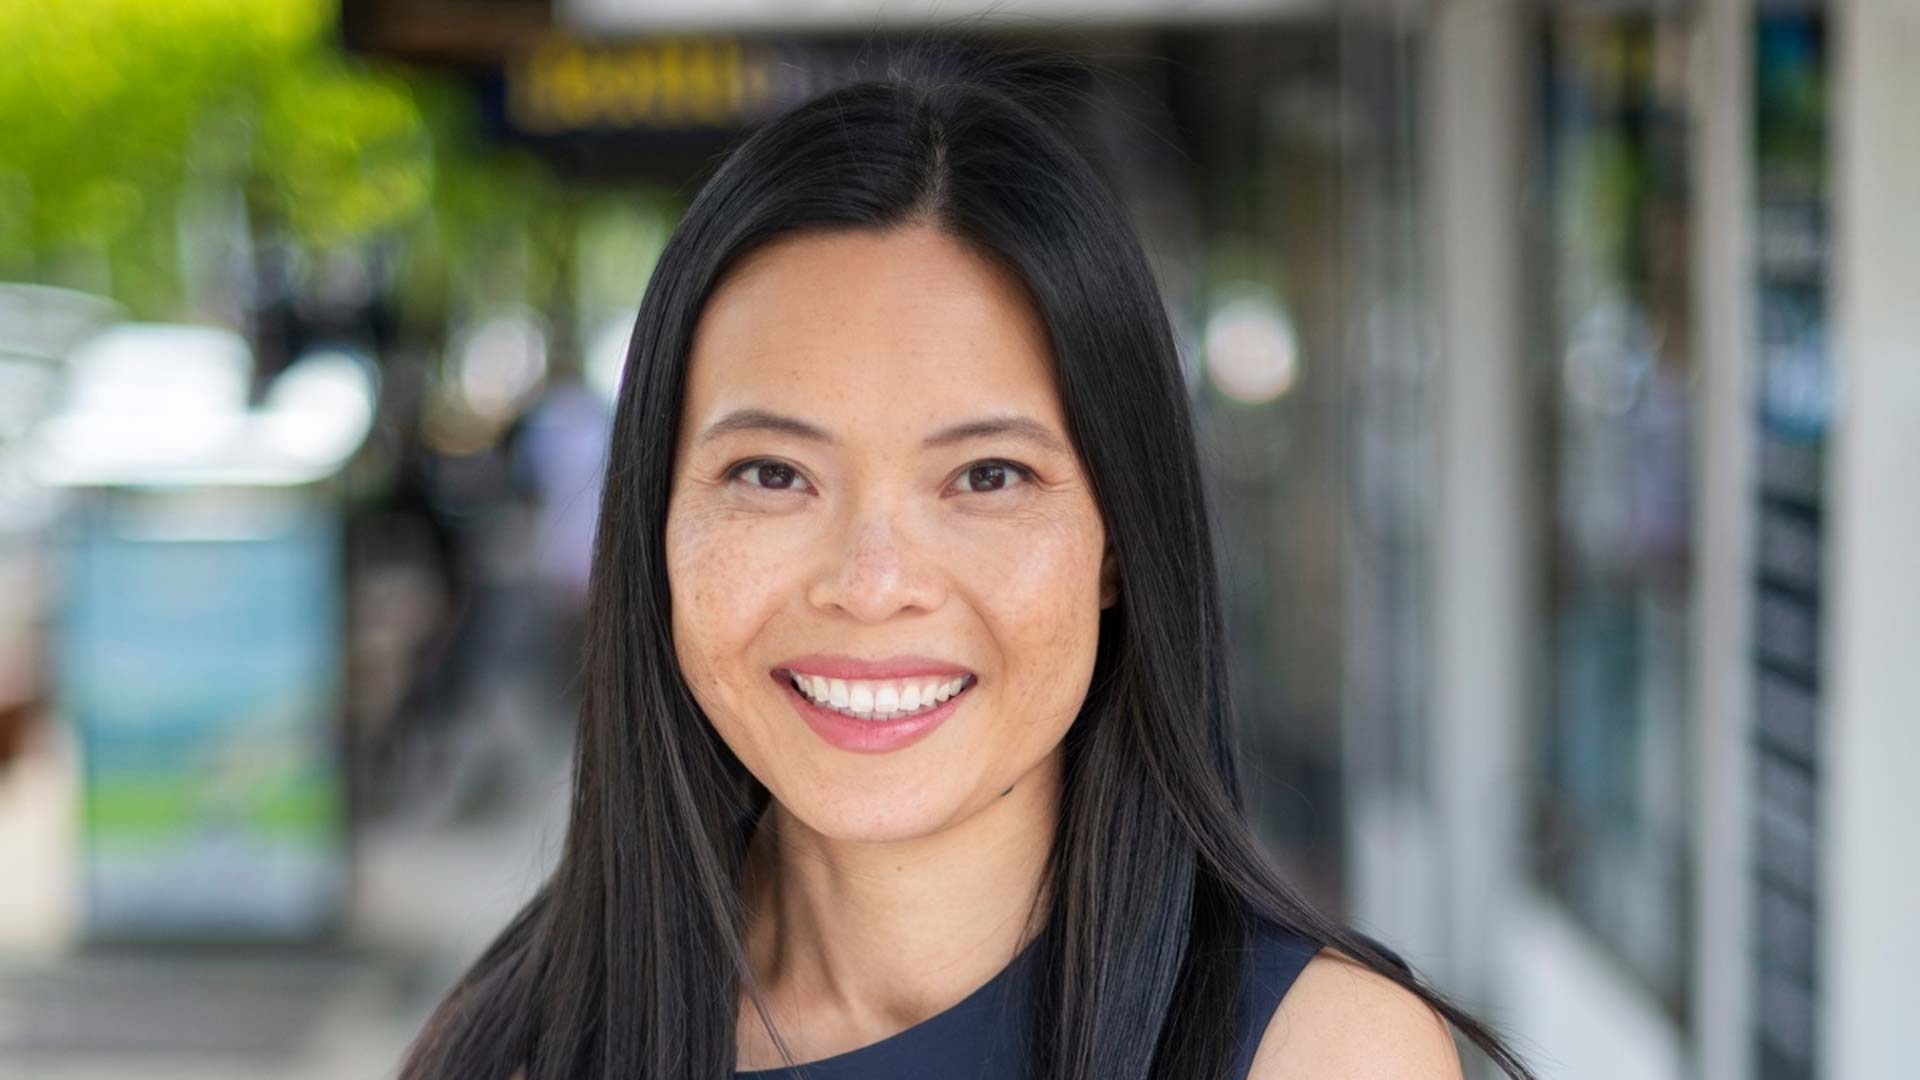 Photo of Sally Sitou MP smiling, suburban shopping strip in the background